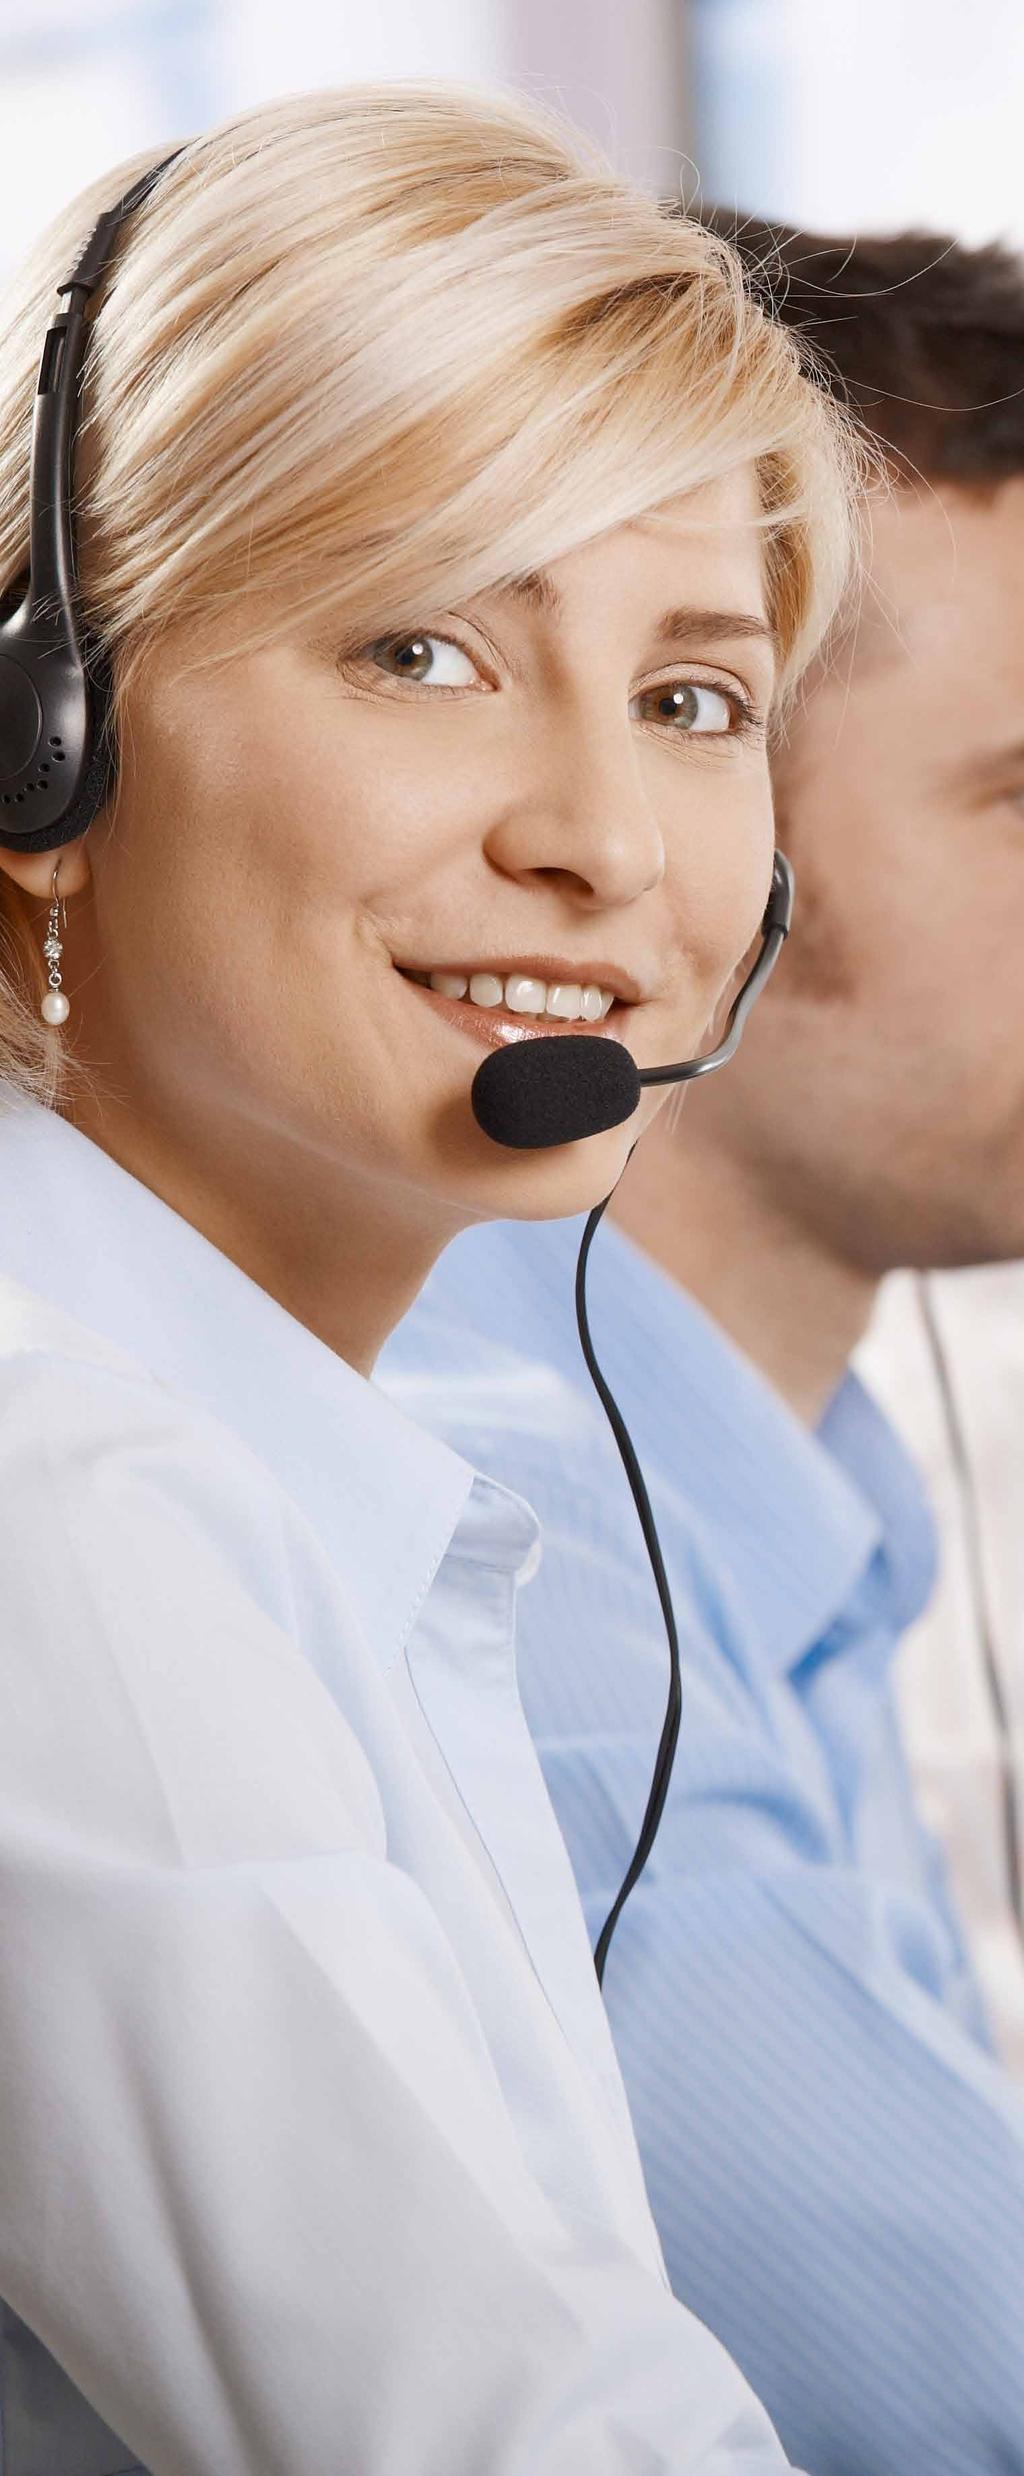 World Class Customer Support Customer Service Full-time customer service representatives with extensive product knowledge are ready to answer your questions and take your orders.